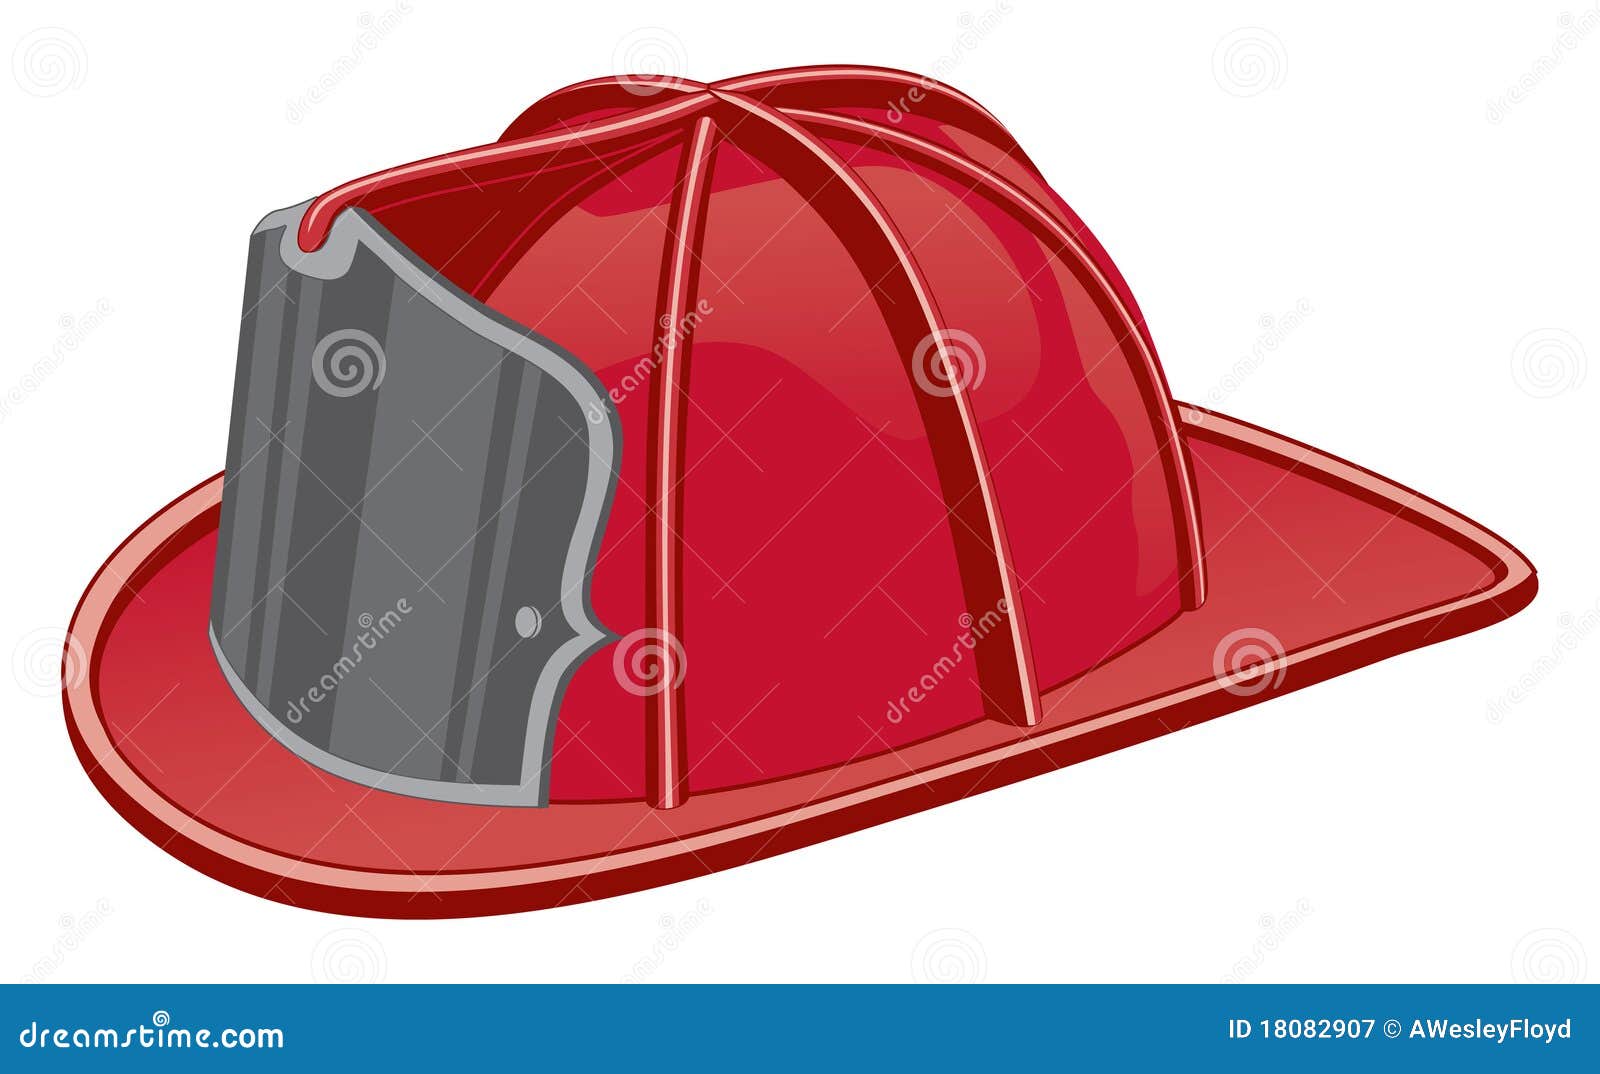 firefighter hat clipart - photo #18